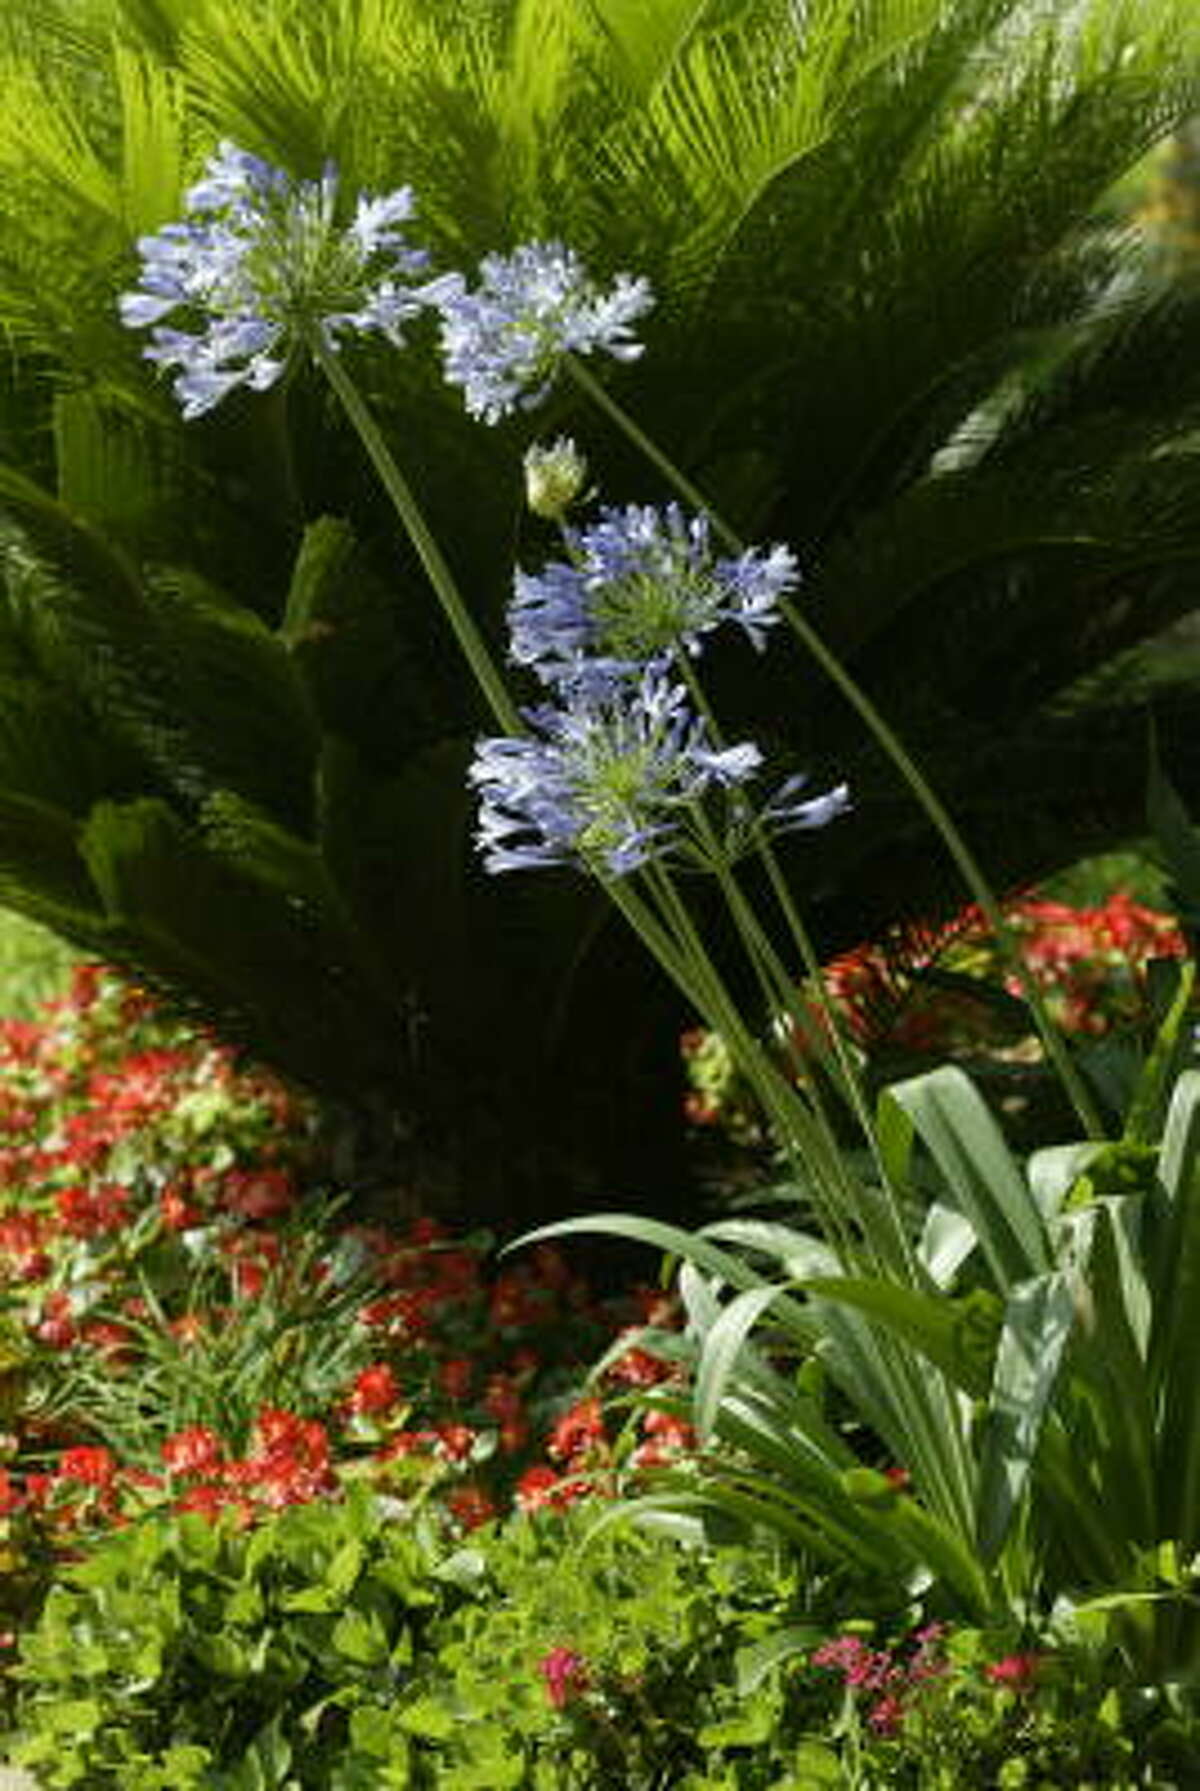 Blue agapanthus and red begonias ensure curb appeal.